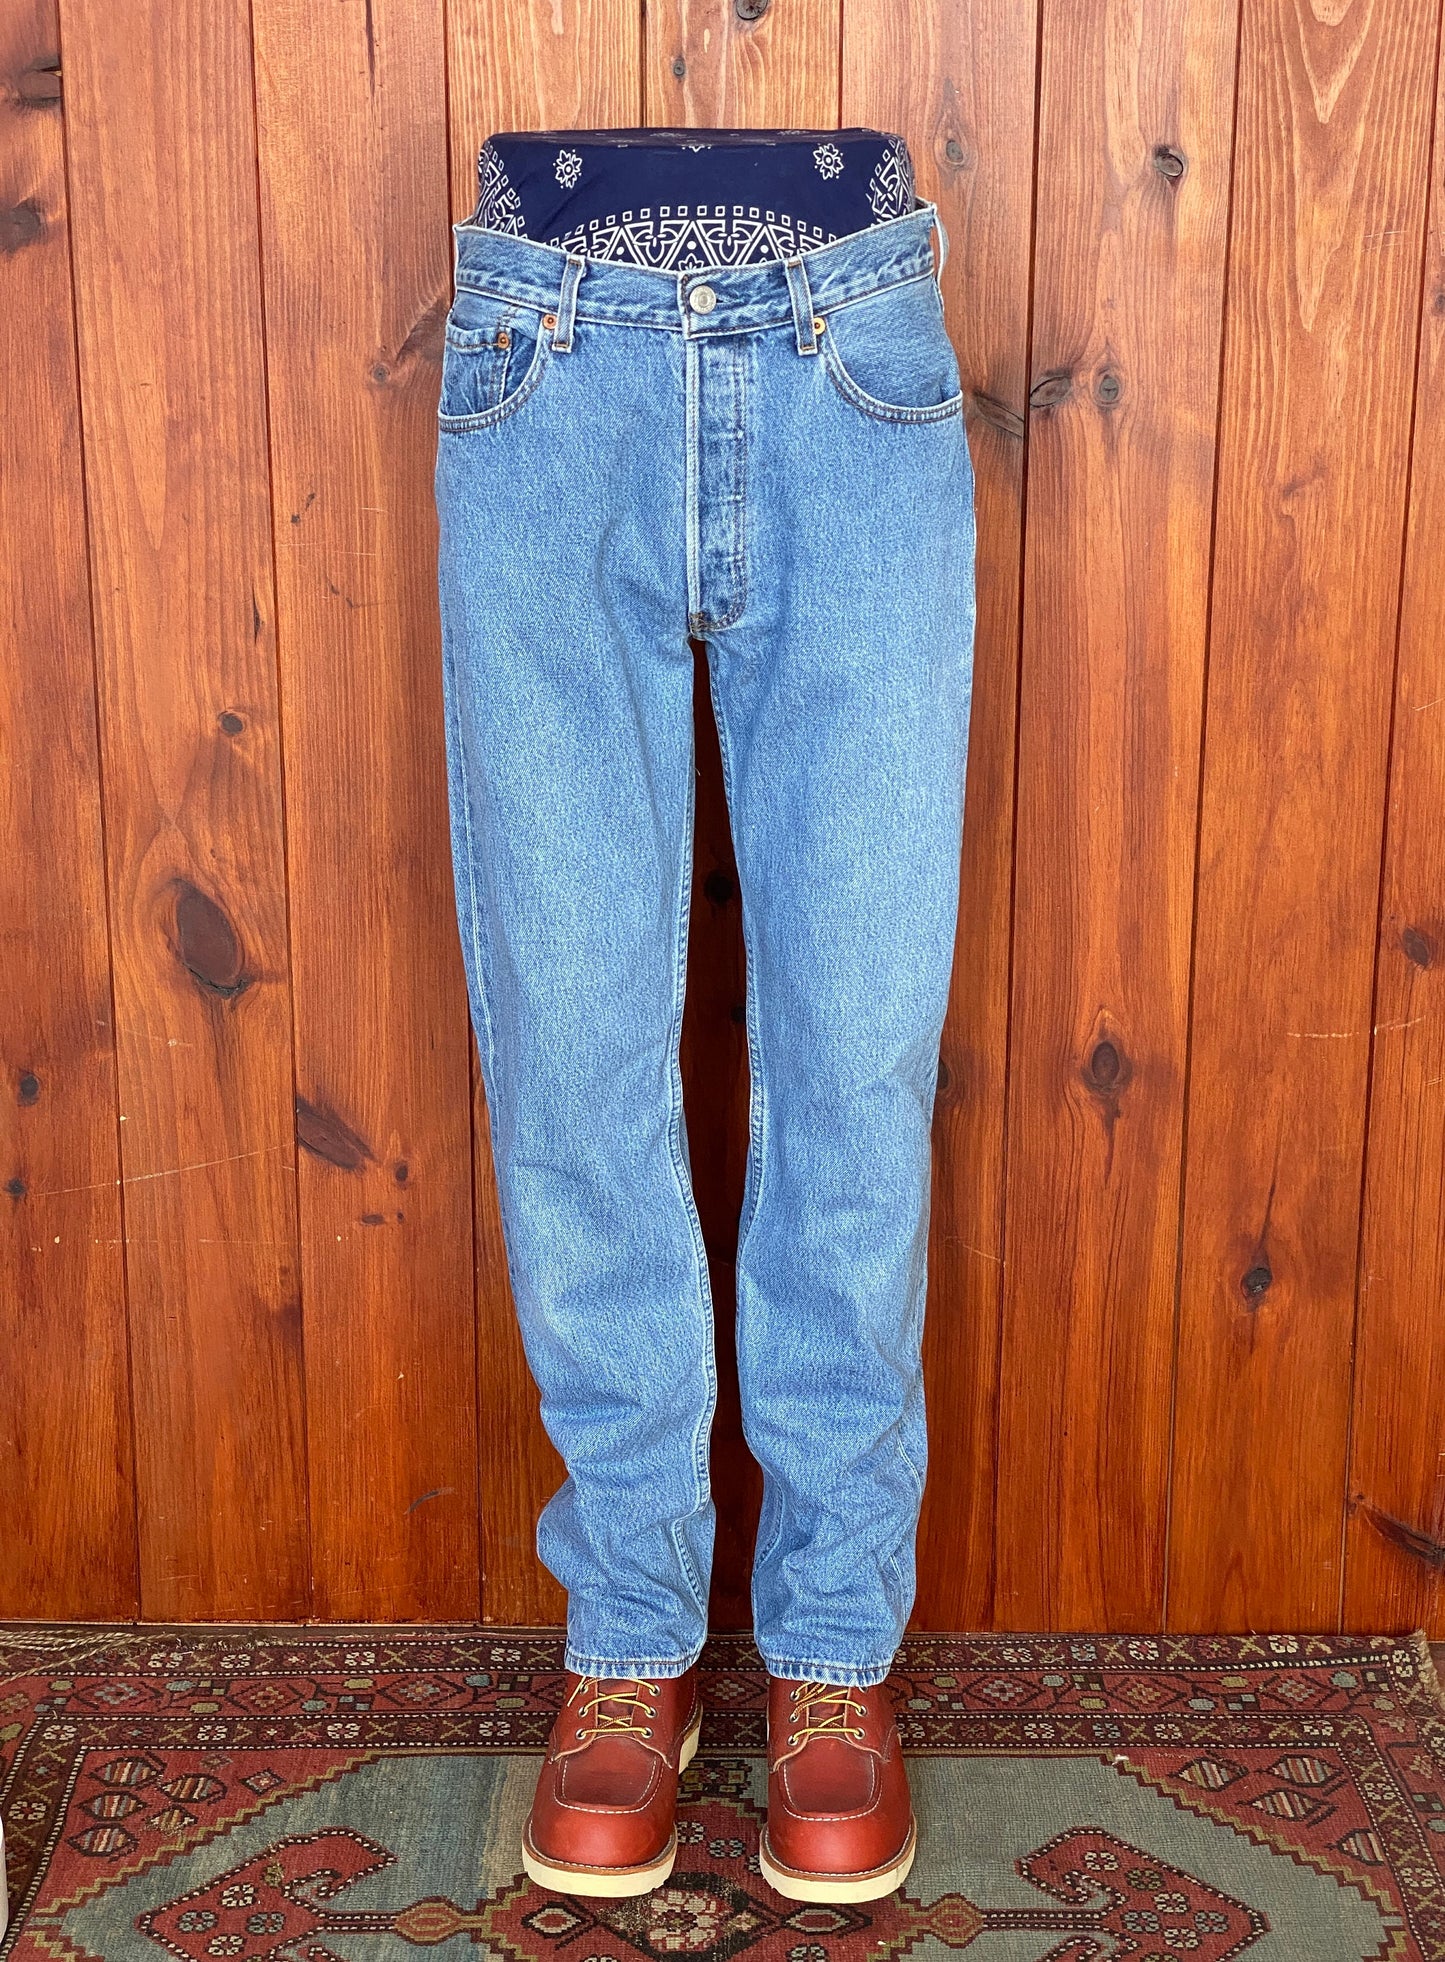 Levi's 501 Vintage Jeans Made in Mexico - Size 32x34 BLUE